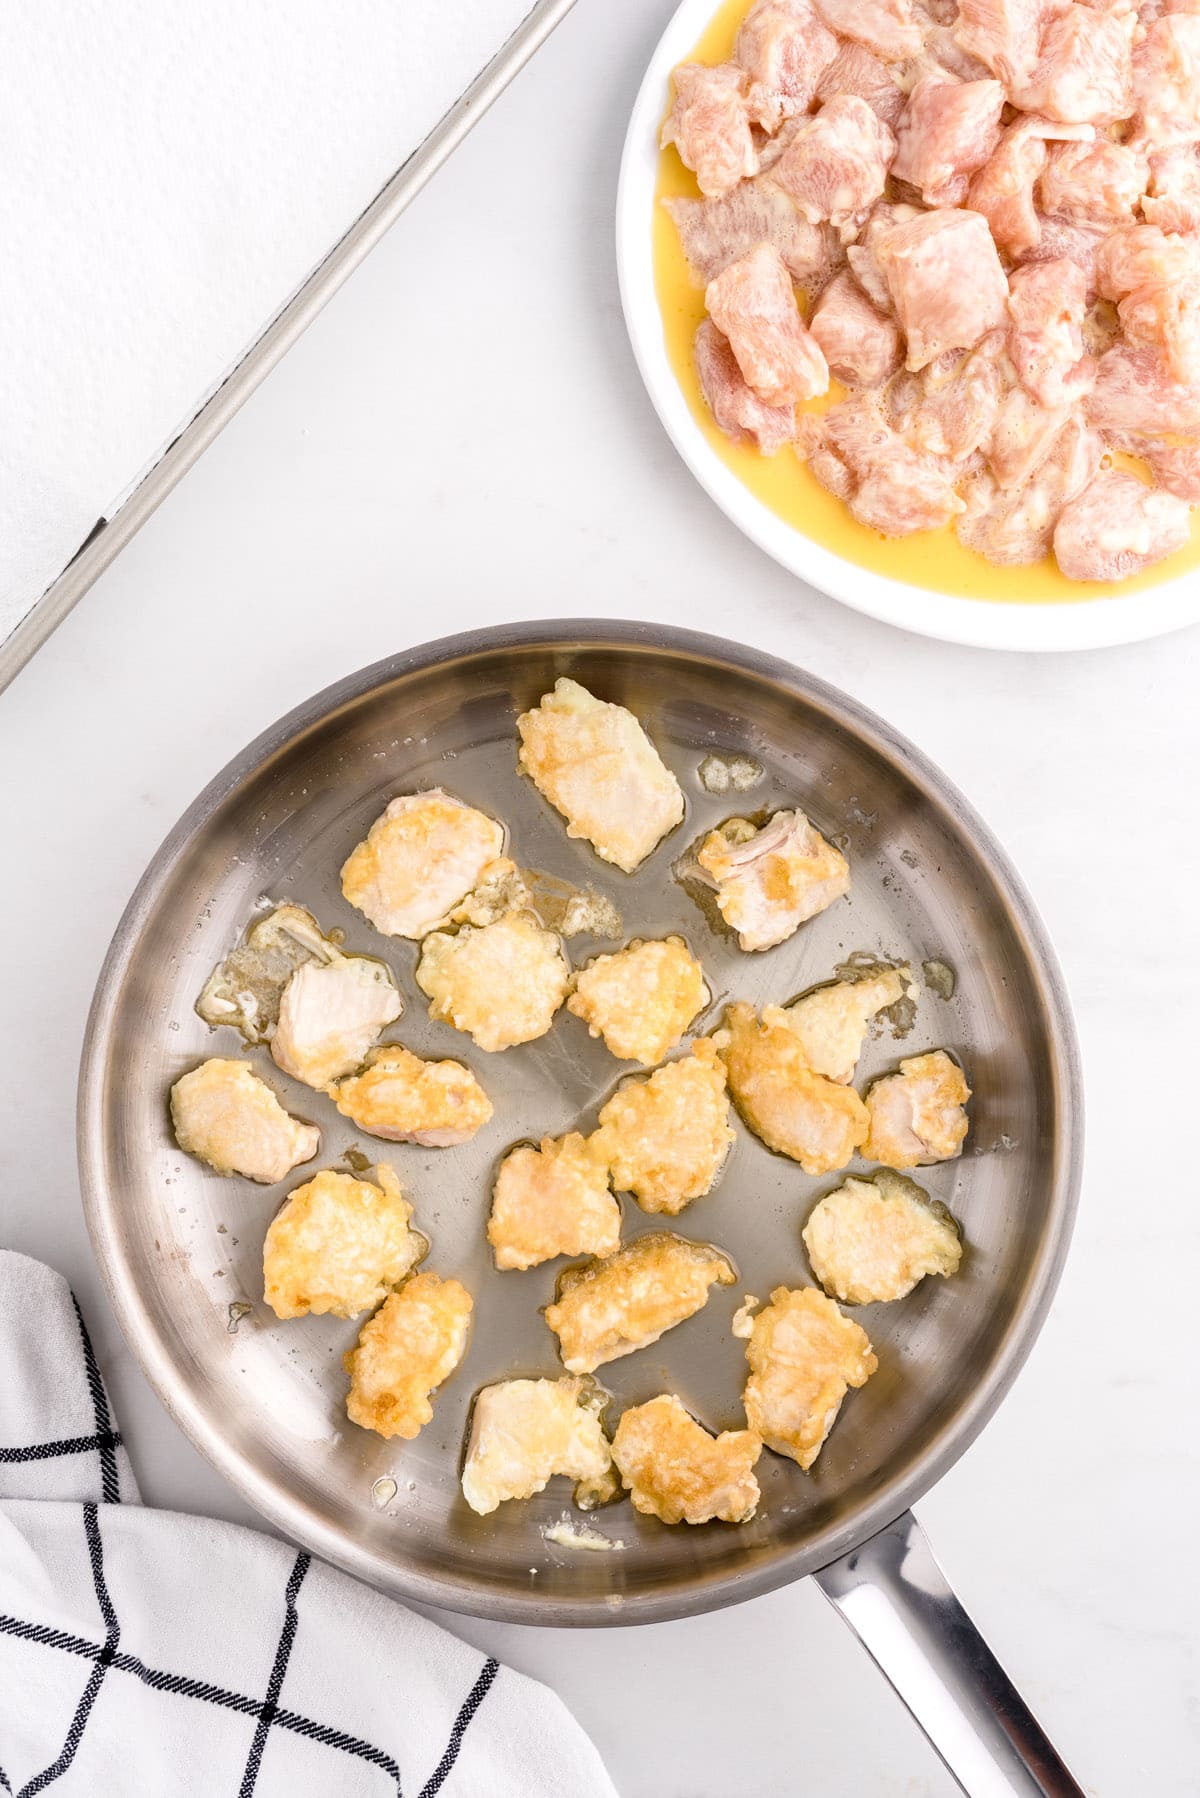 gently place ½ of your coated chicken pieces into the oil in a single layer